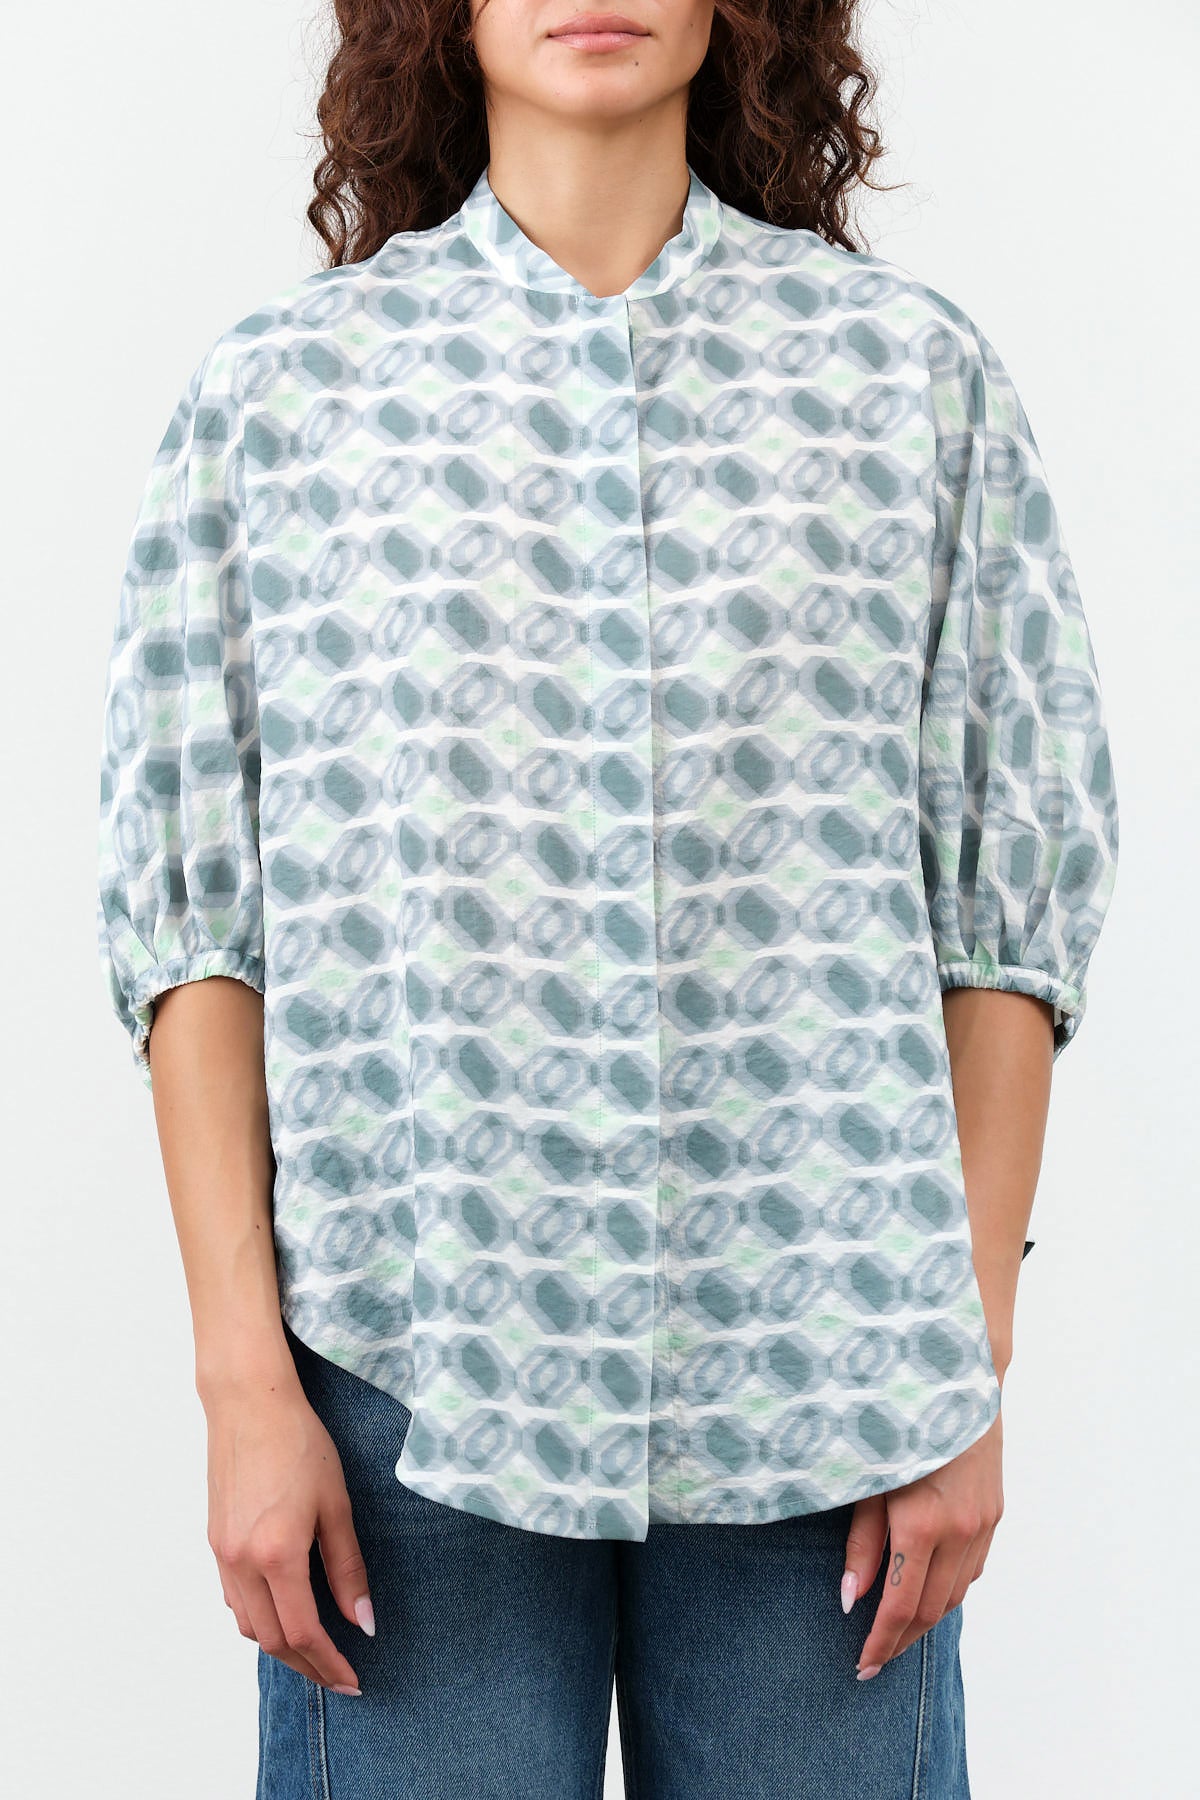 Taria Shirt in Mint Grey Tiles by Christian Wijnants